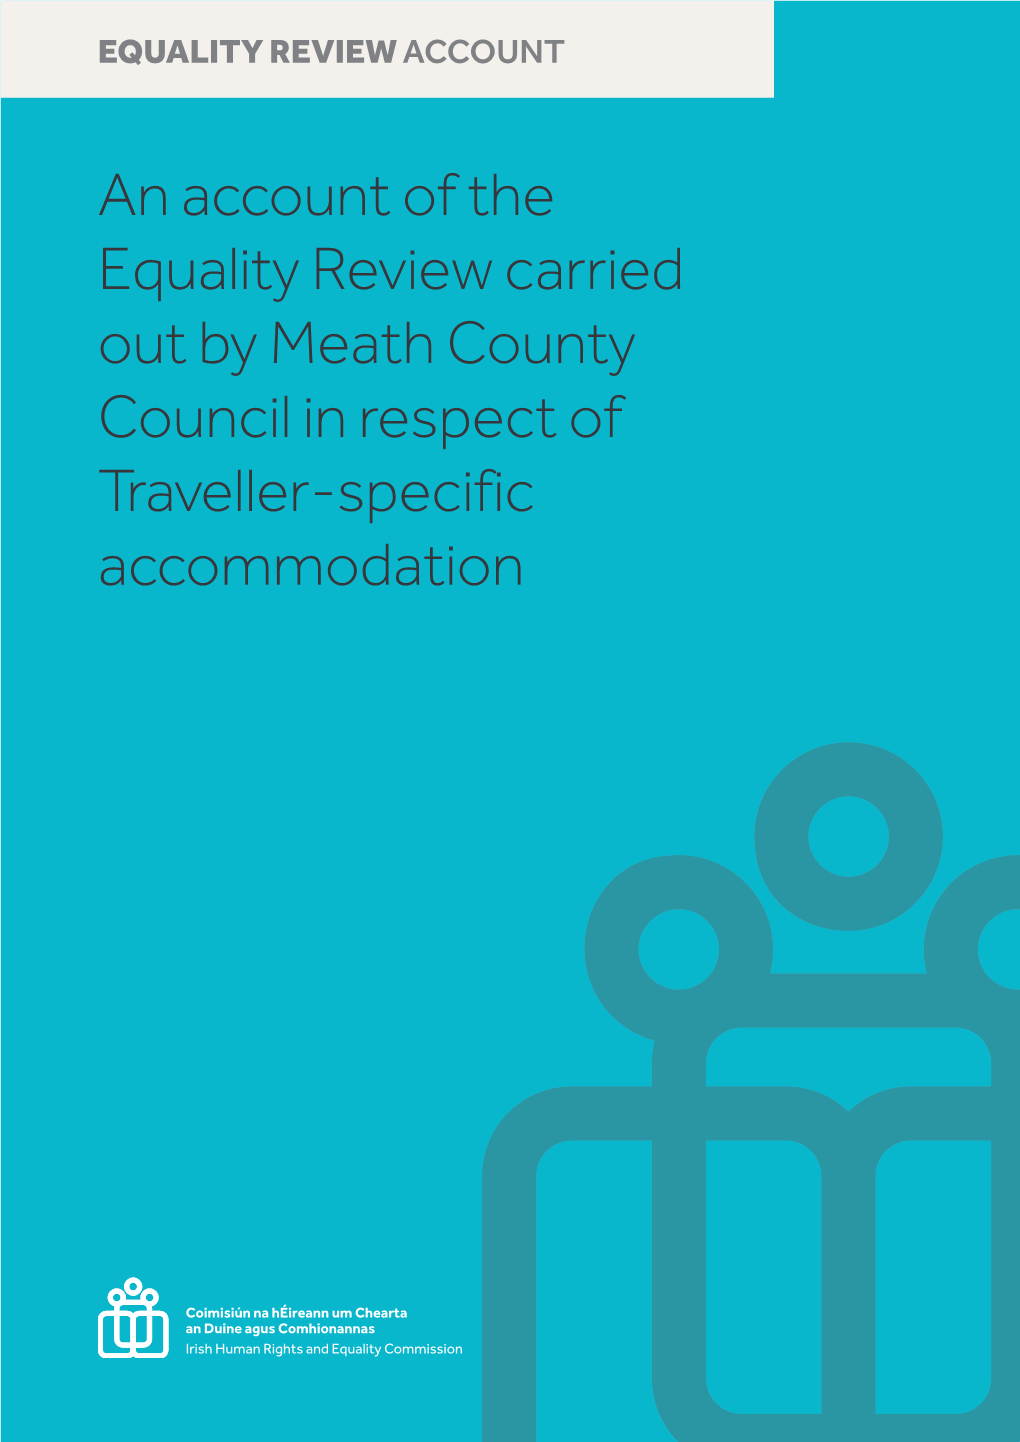 Meath CC Equality Review IHREC